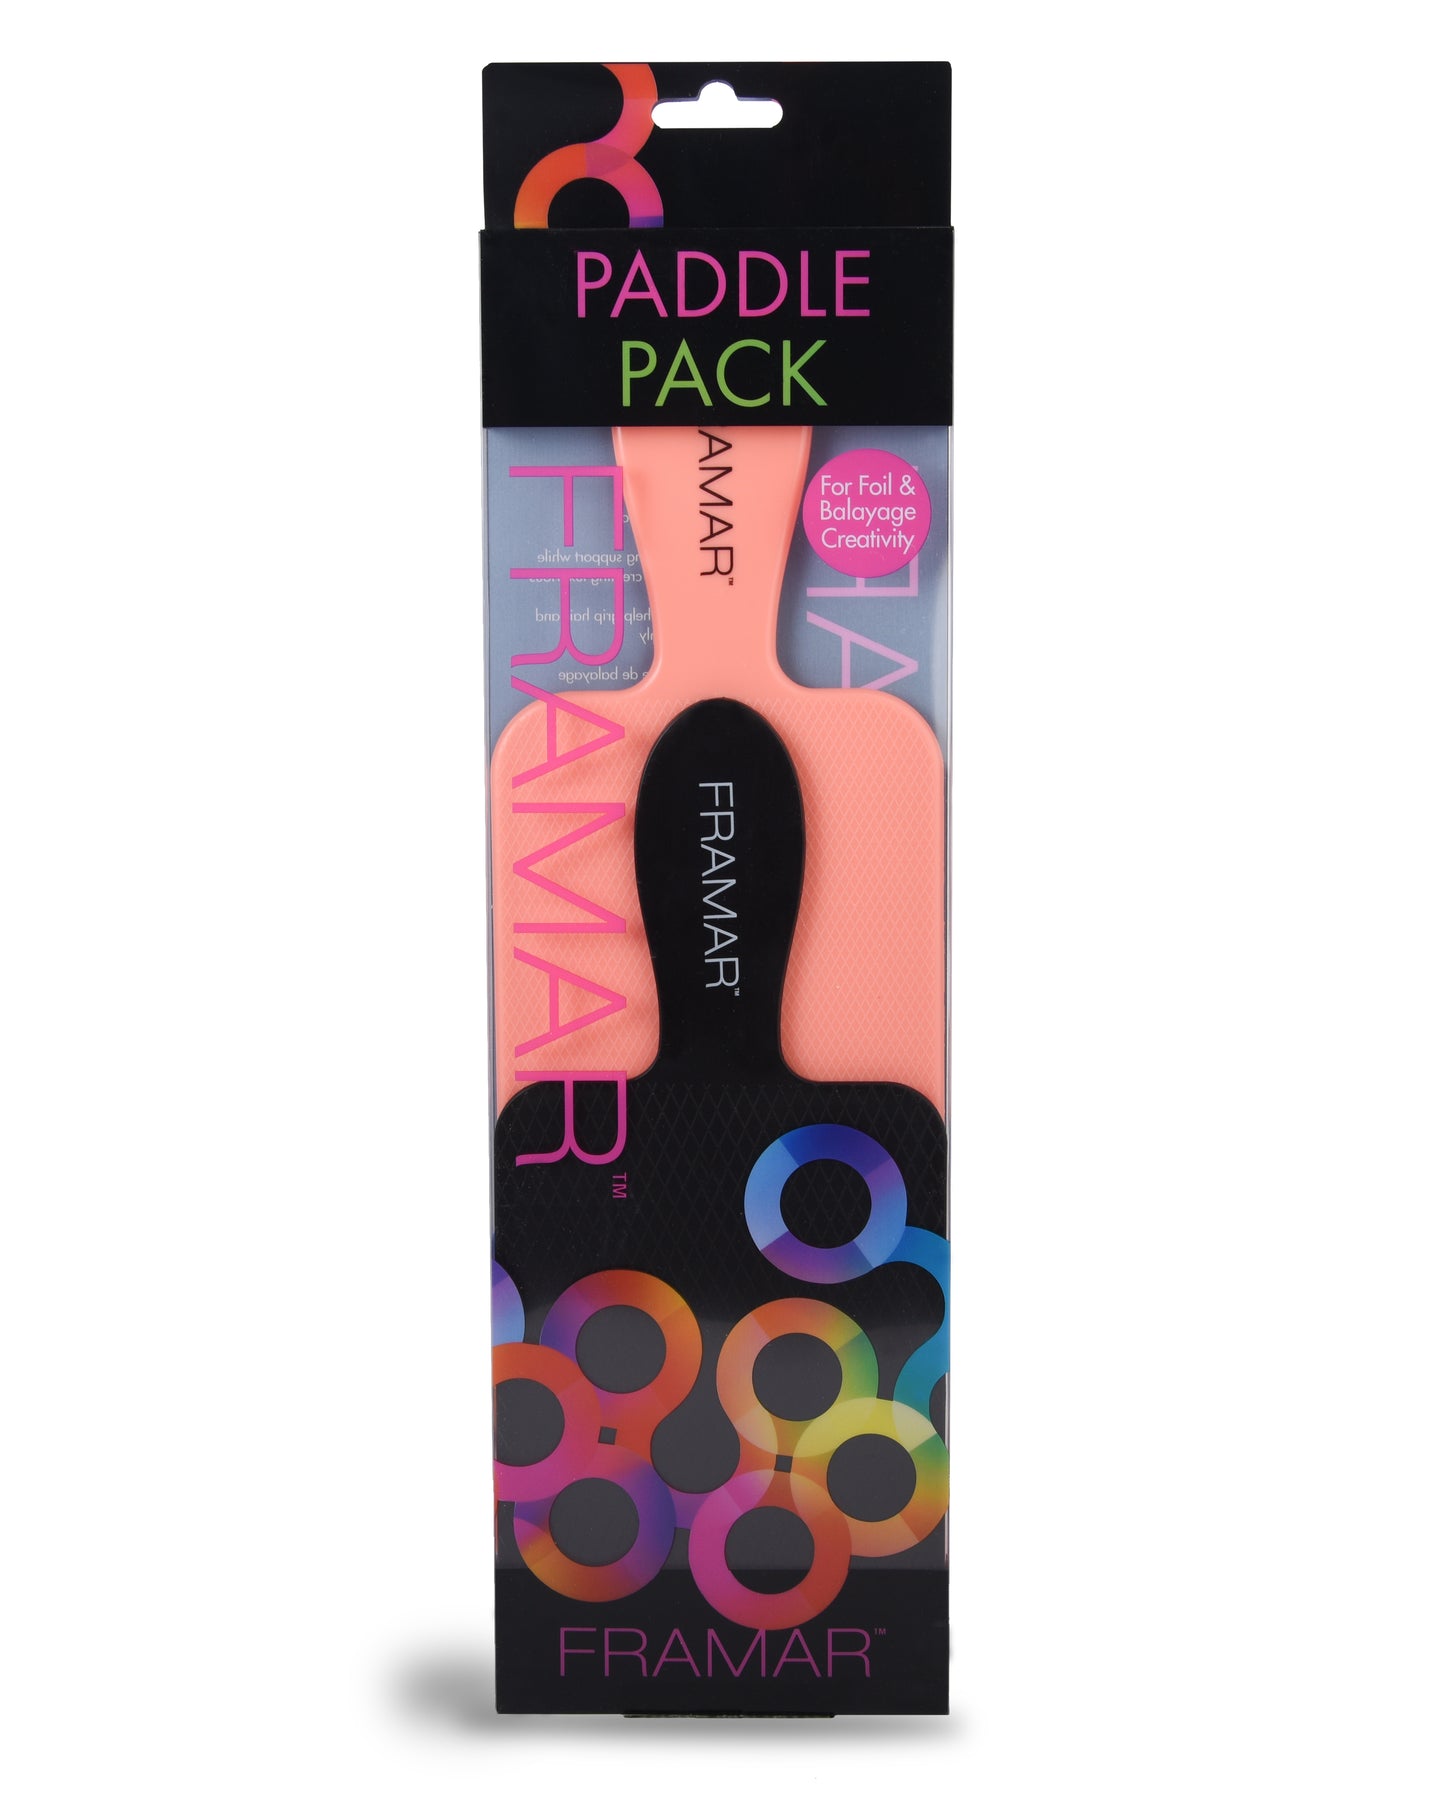 Paddle Pack